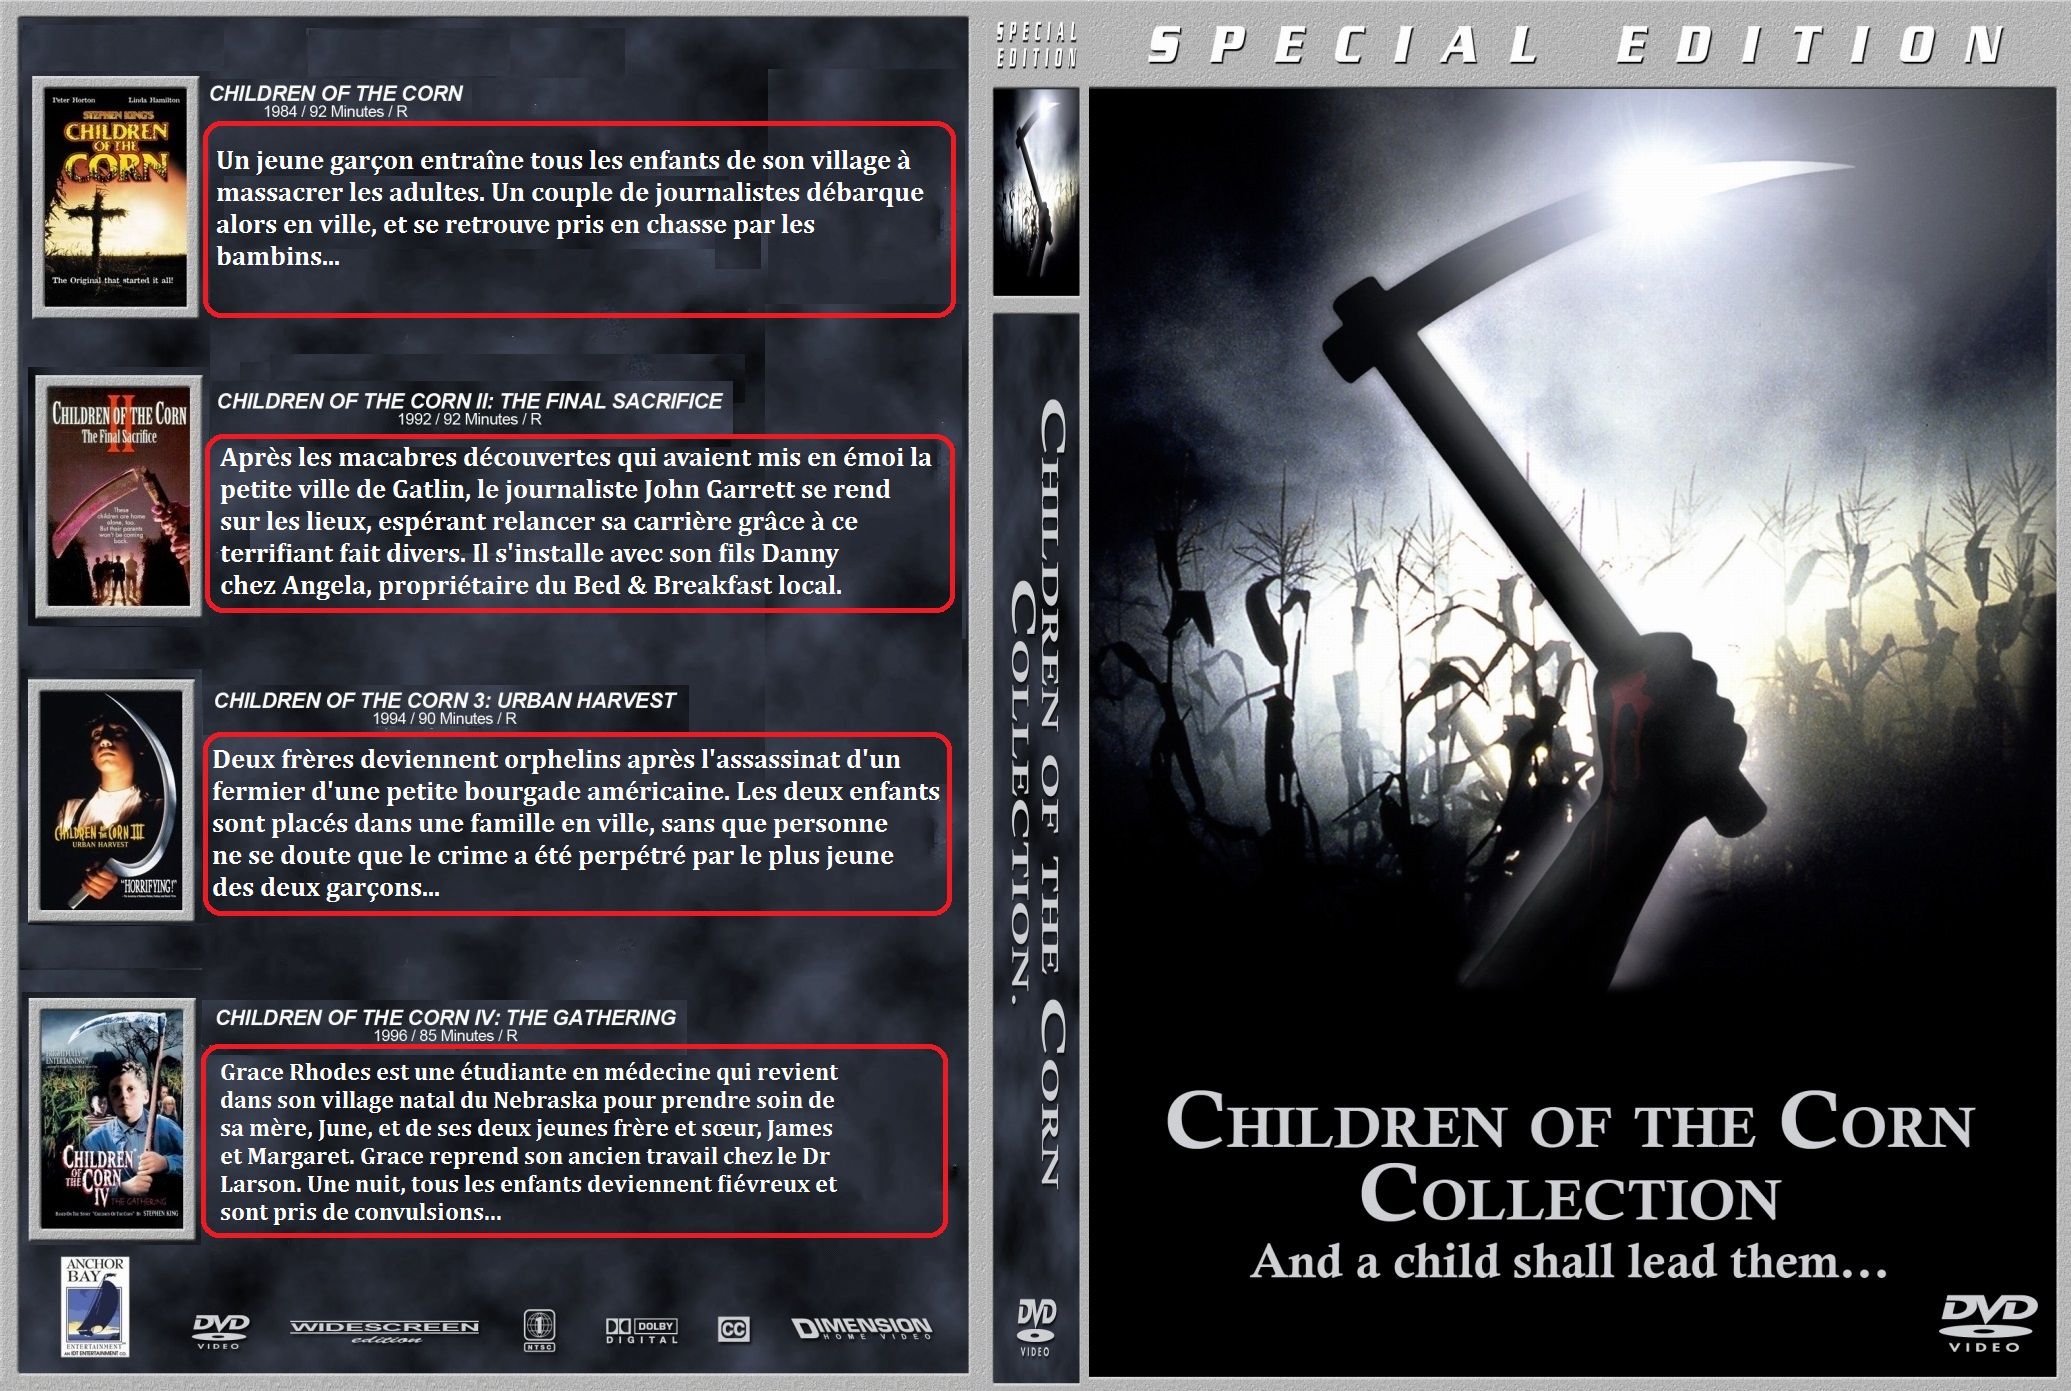 Jaquette DVD Children of the corn Collection Custom  